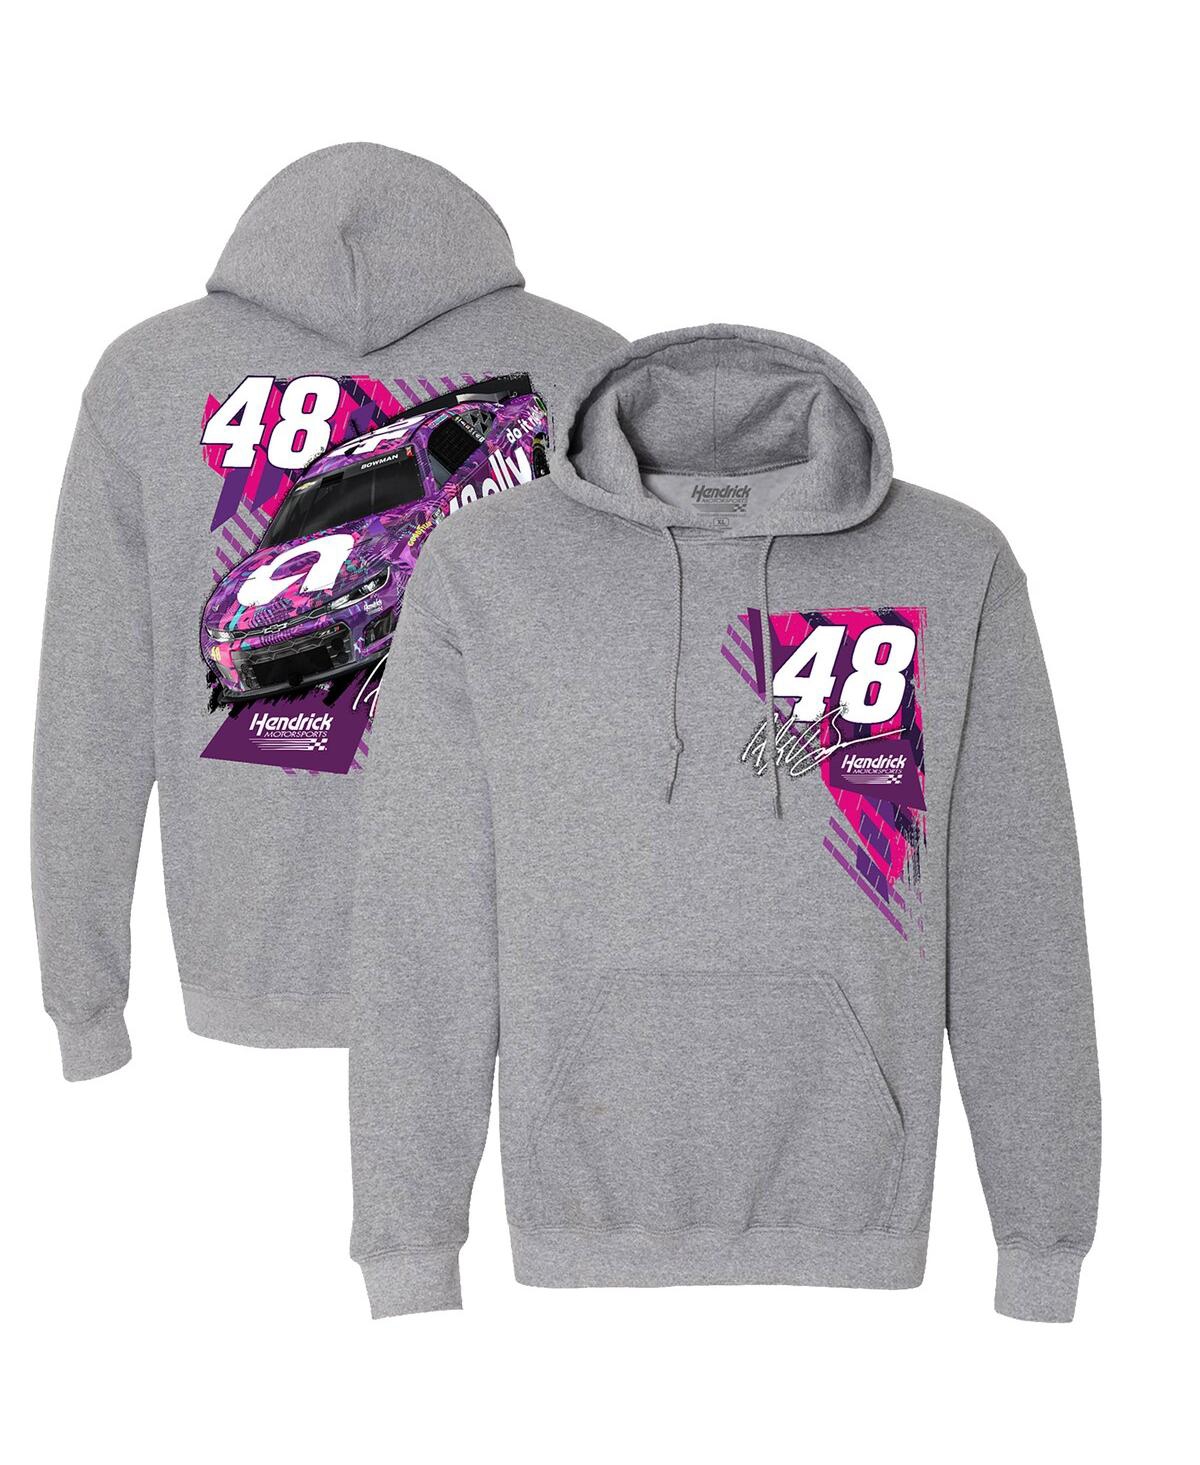 Men's Hendrick Motorsports Team Collection Heather Charcoal Alex Bowman Ally Pullover Hoodie - Heather Charcoal